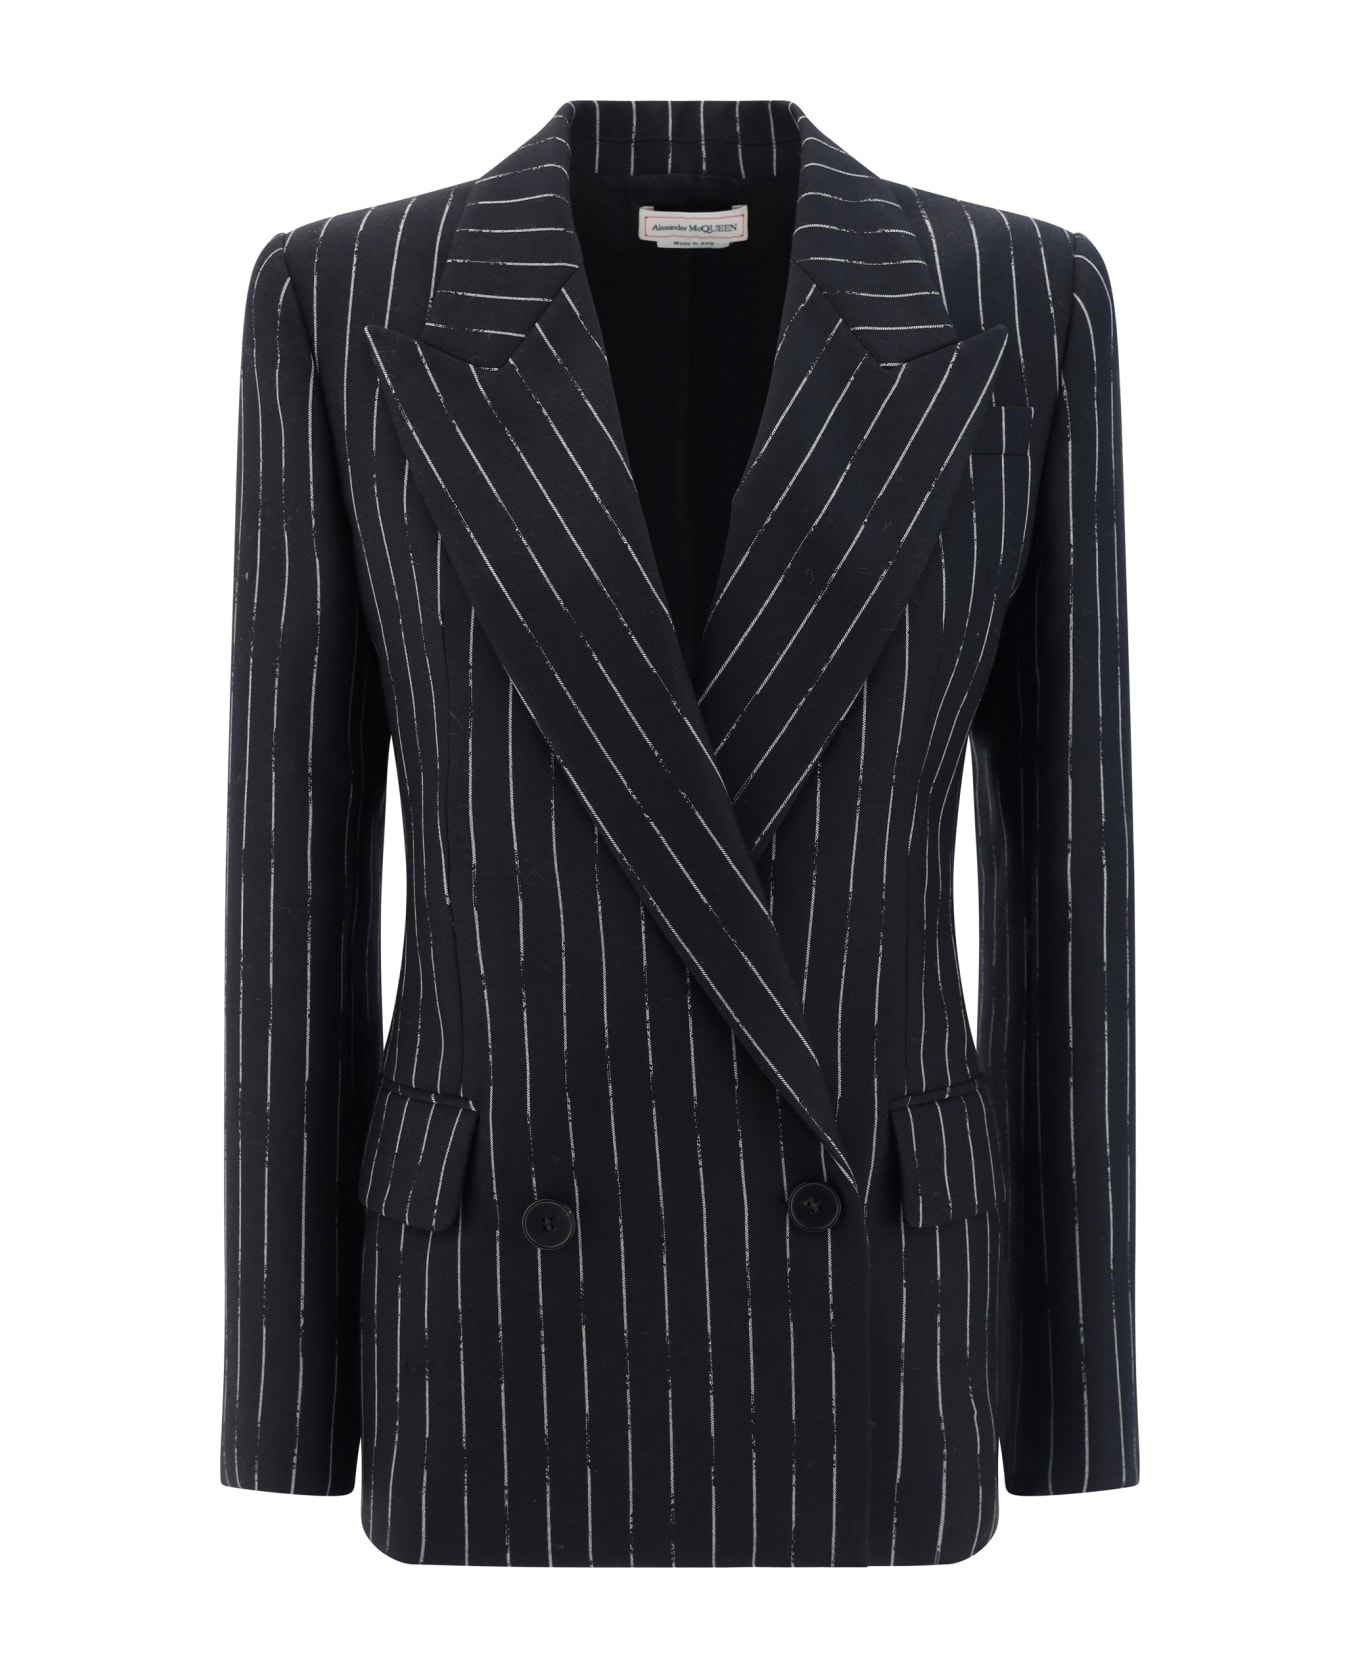 Alexander McQueen Double-breasted Blazer - Black/ivory ブレザー